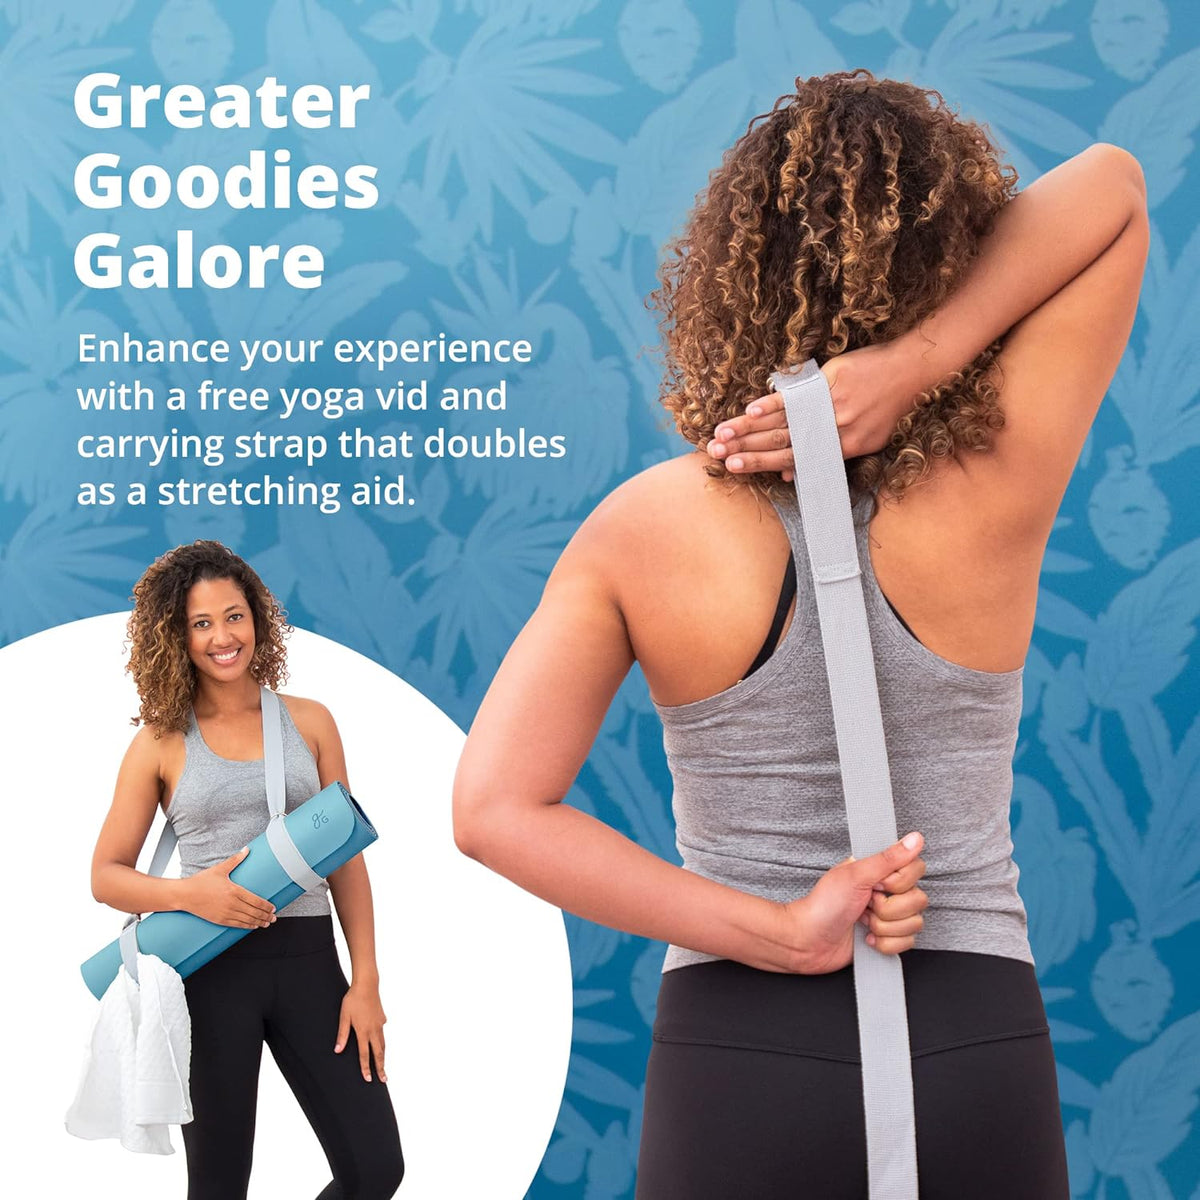 Greater Goods Exercise Ball (75cm) and Yoga Mat with Free Carrying Strap Bundle, Deep Sky Blue